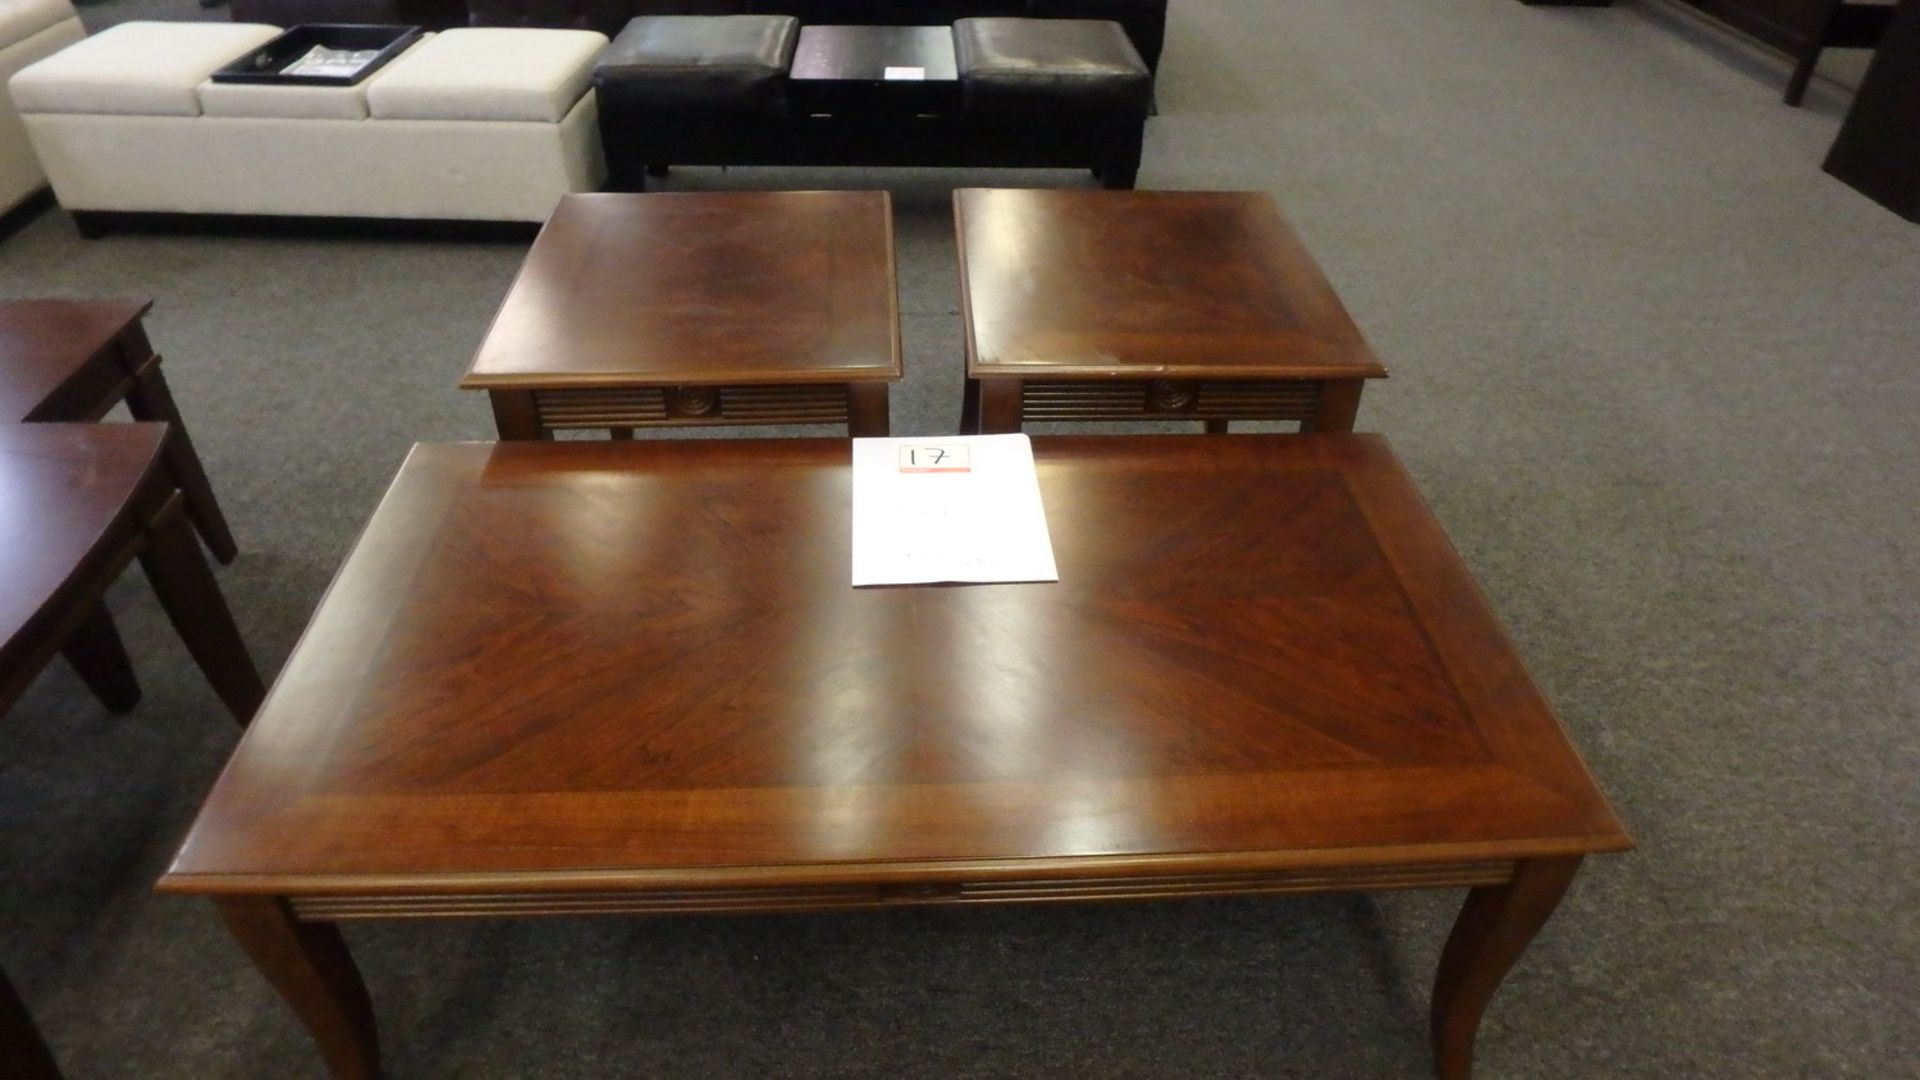 SETS - RECTANGULAR WOOD COFFEE TABLE C/W (2) SQUARE SIDE TABLES (LK-325) (NEW IN BOX)